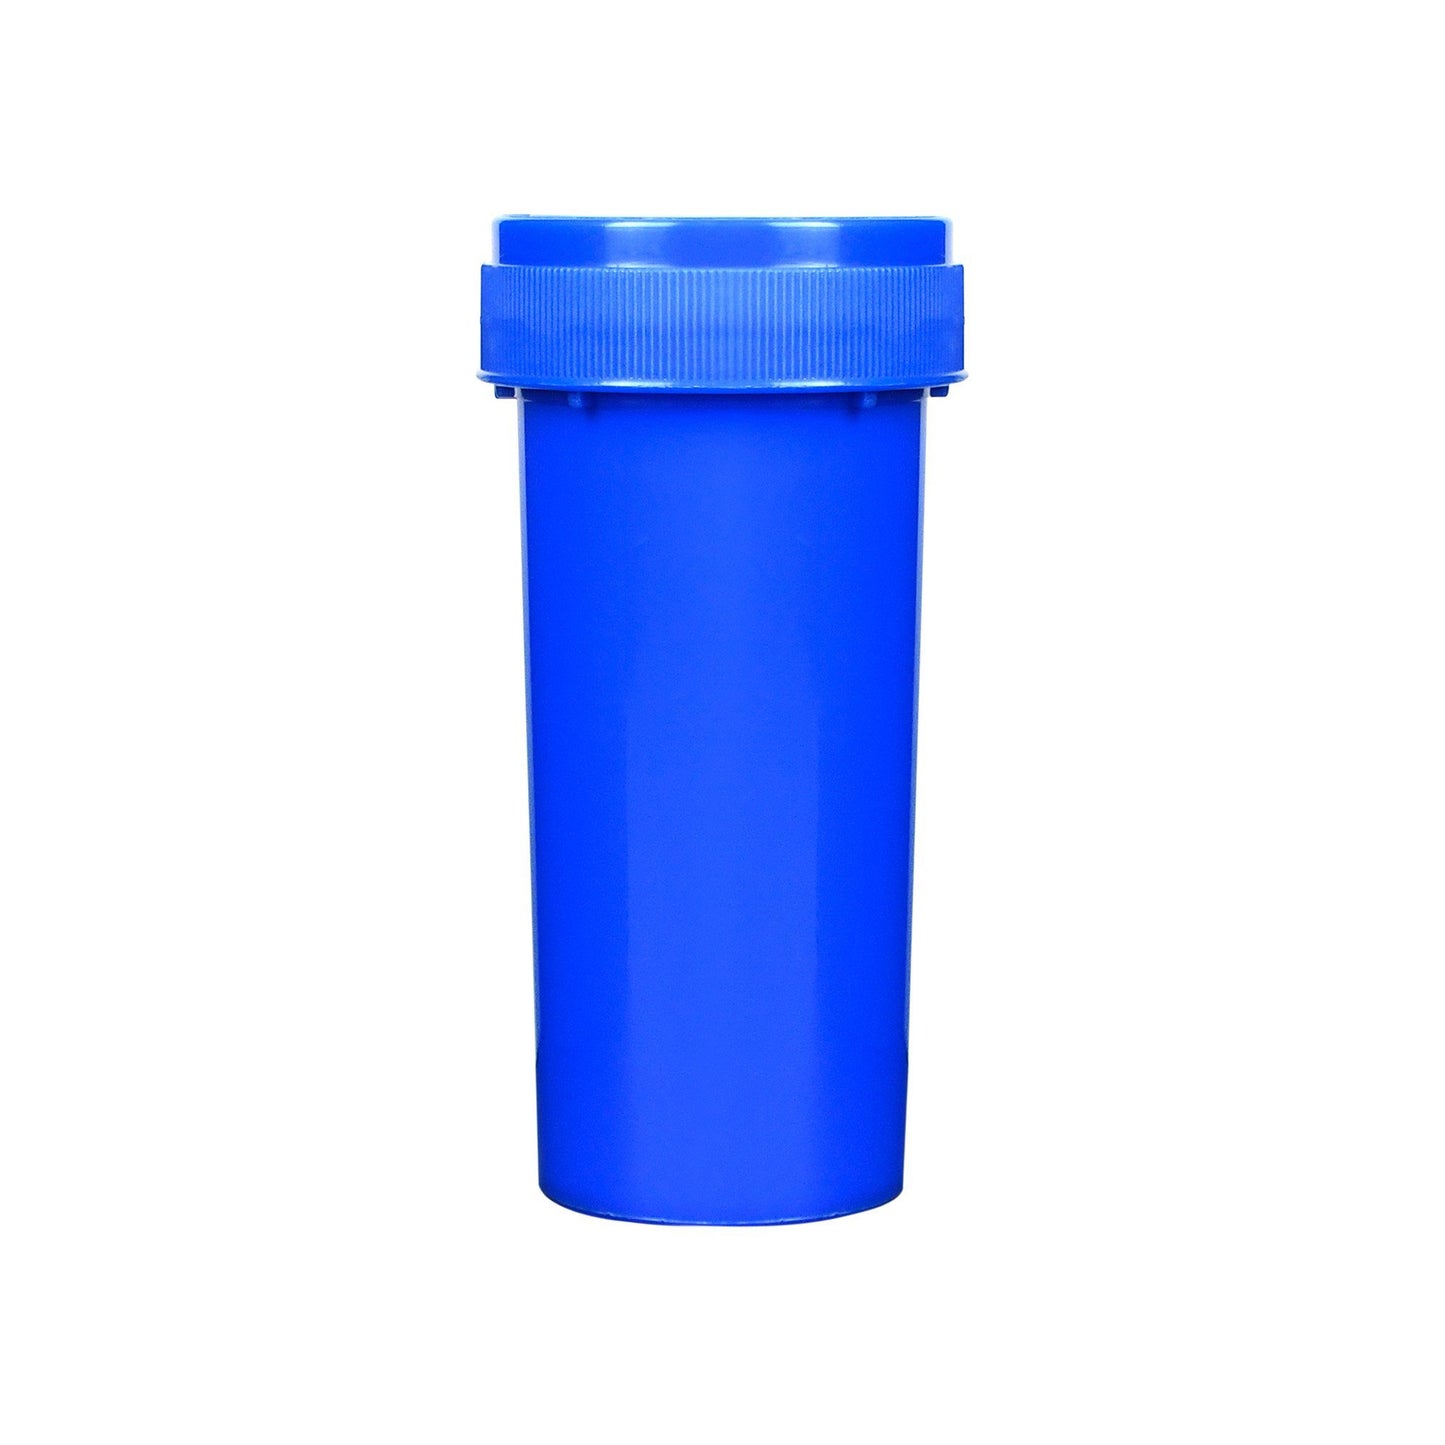 Opaque Blue 20 Dram Reversible Cap Vials for Medical Pharmacies & Dispensaries at Flower Power Packages